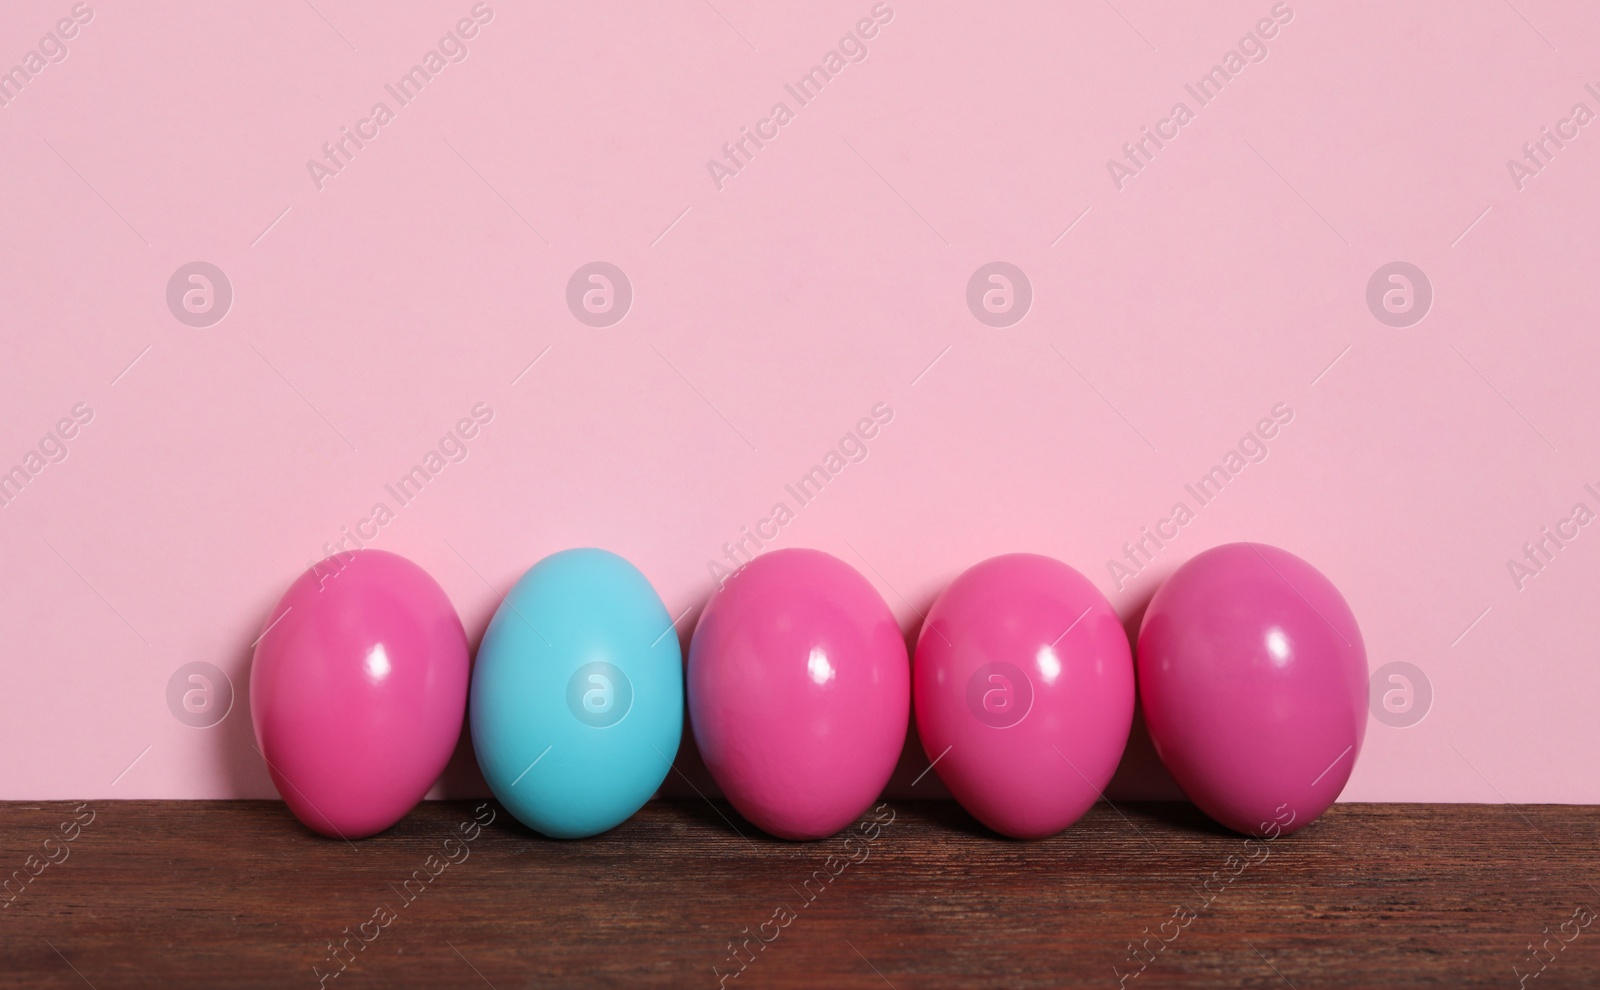 Photo of Easter eggs on wooden table against pink background, space for text